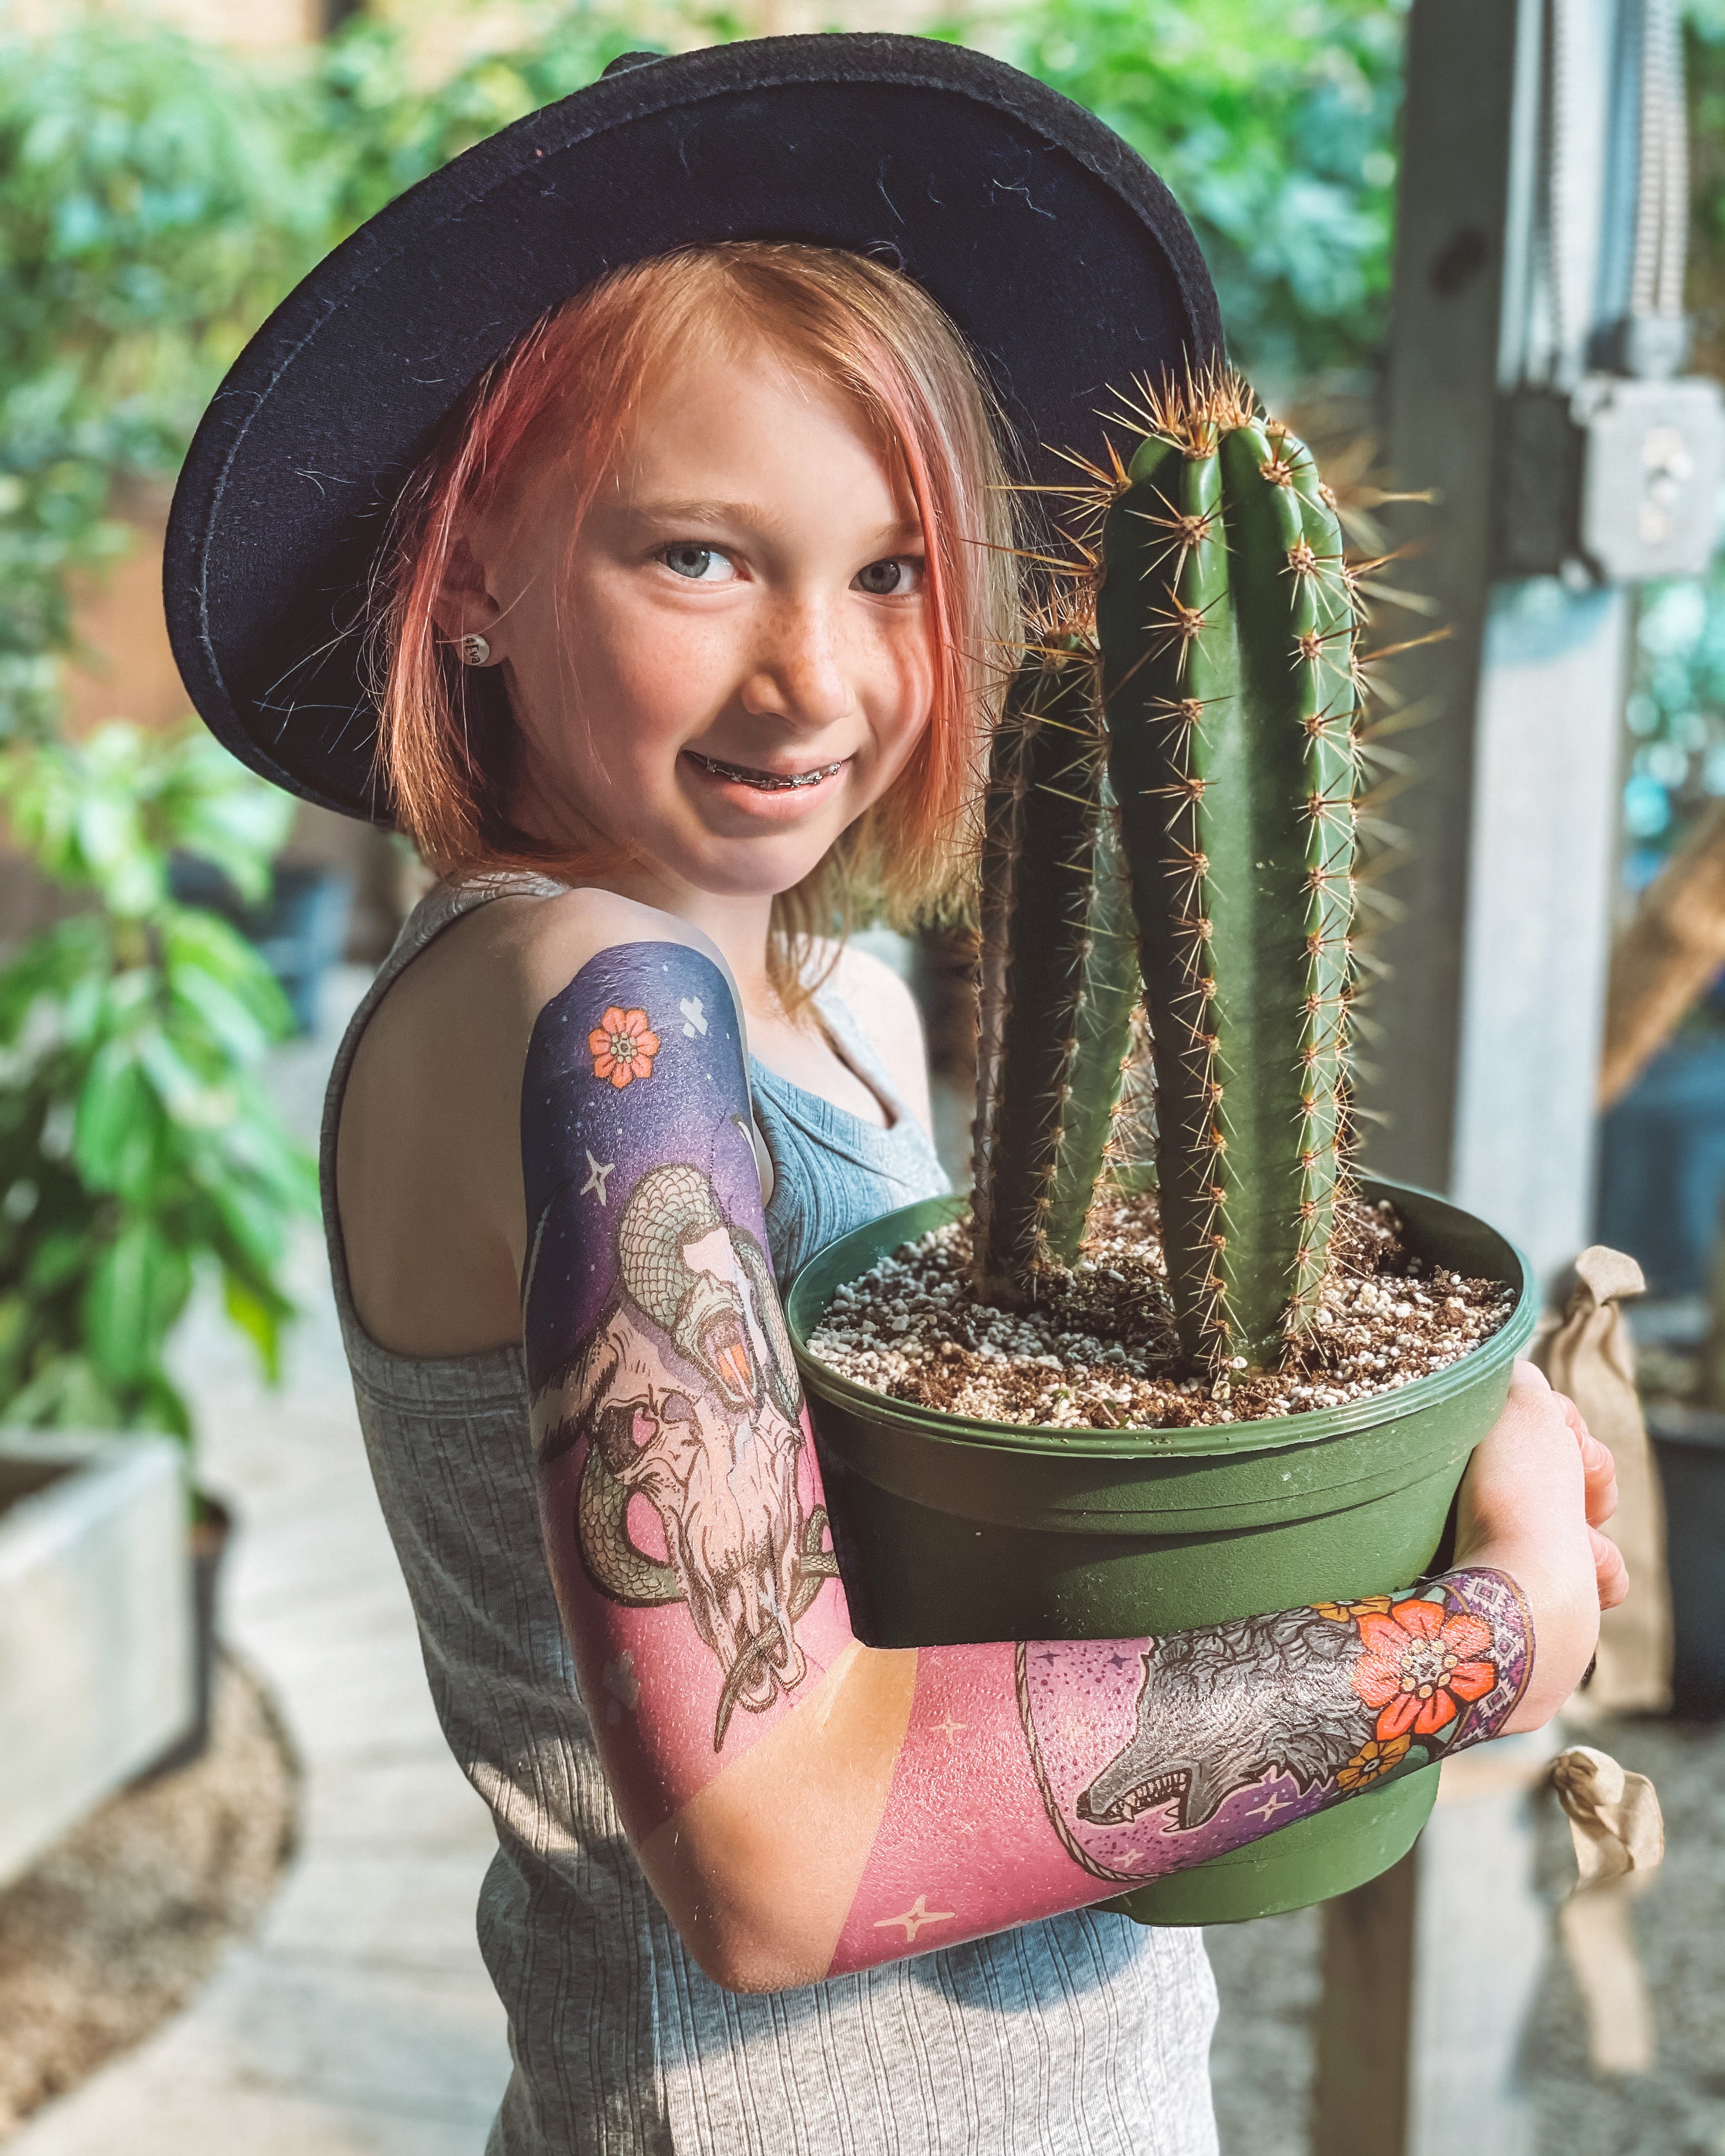 Young girl holding a cactus and showing off her Desert Oasis temporary tattoo sleeve.